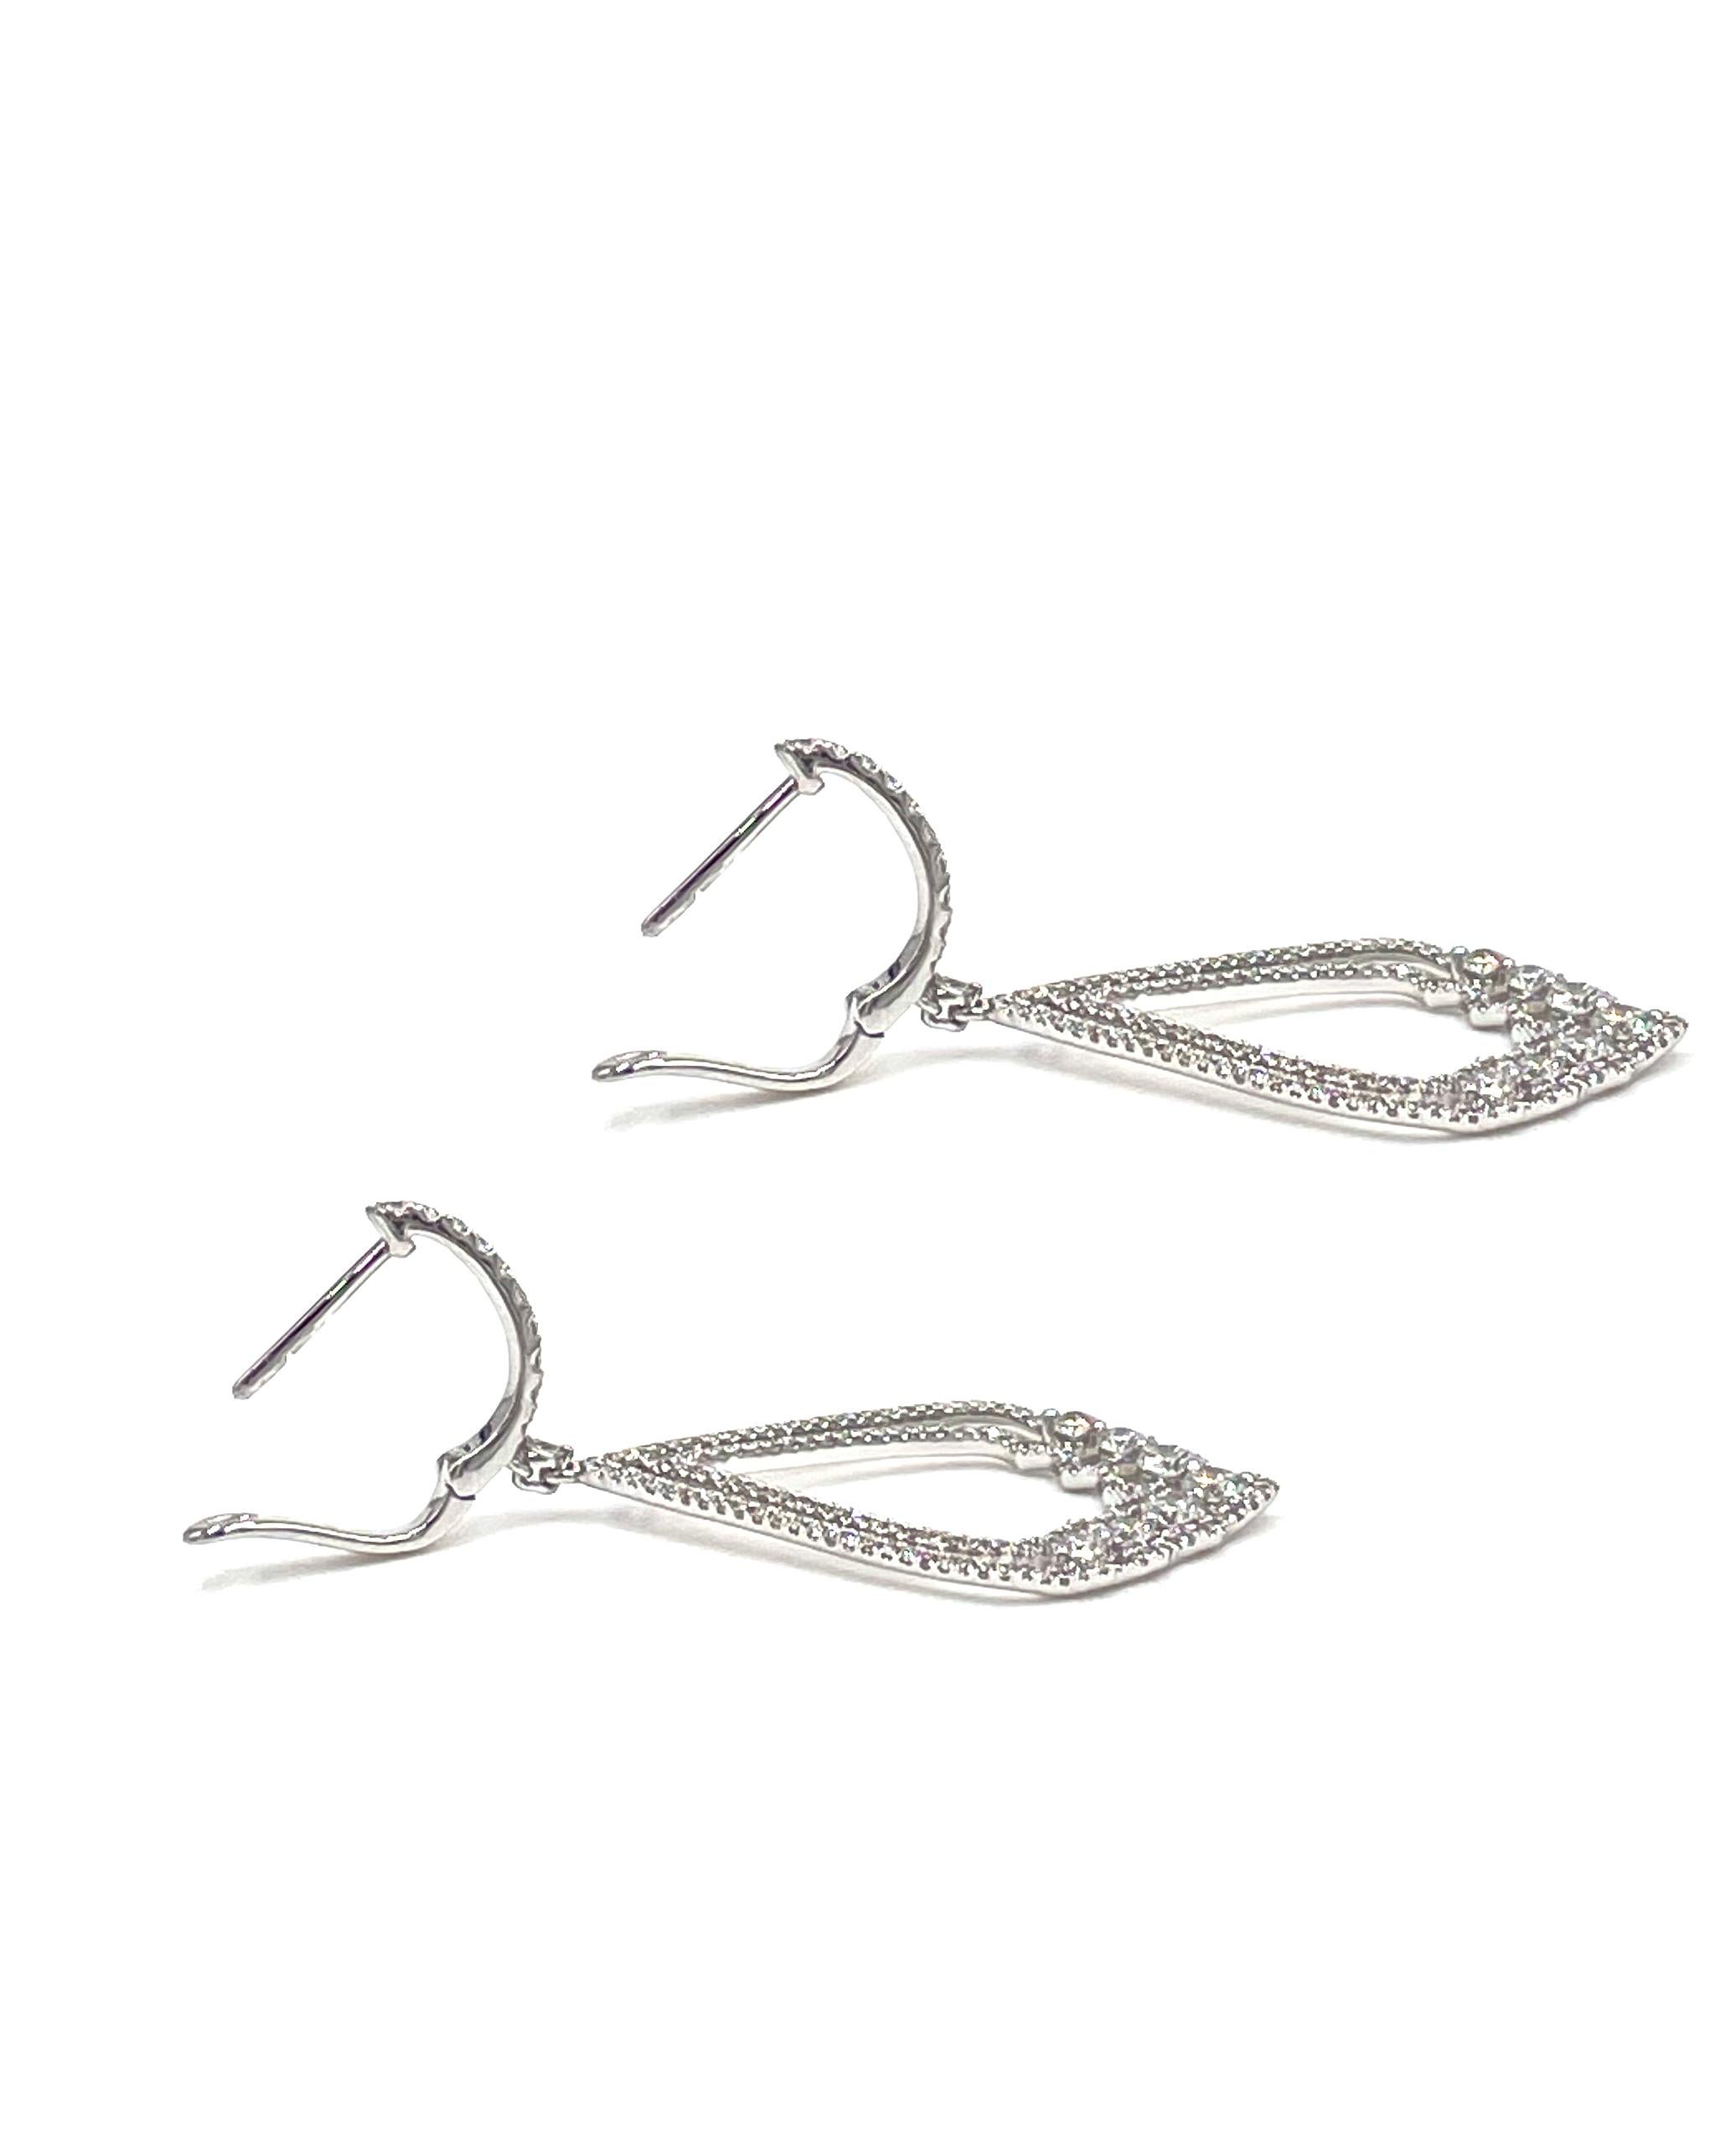 Pair of 18K white gold dangling earrings with  open teardrop design.  The earrings are furnished with graduating round brilliant-cut diamonds weighing 1.60 carats total. 

- The diamonds are G color, VS2/SI1 clarity.